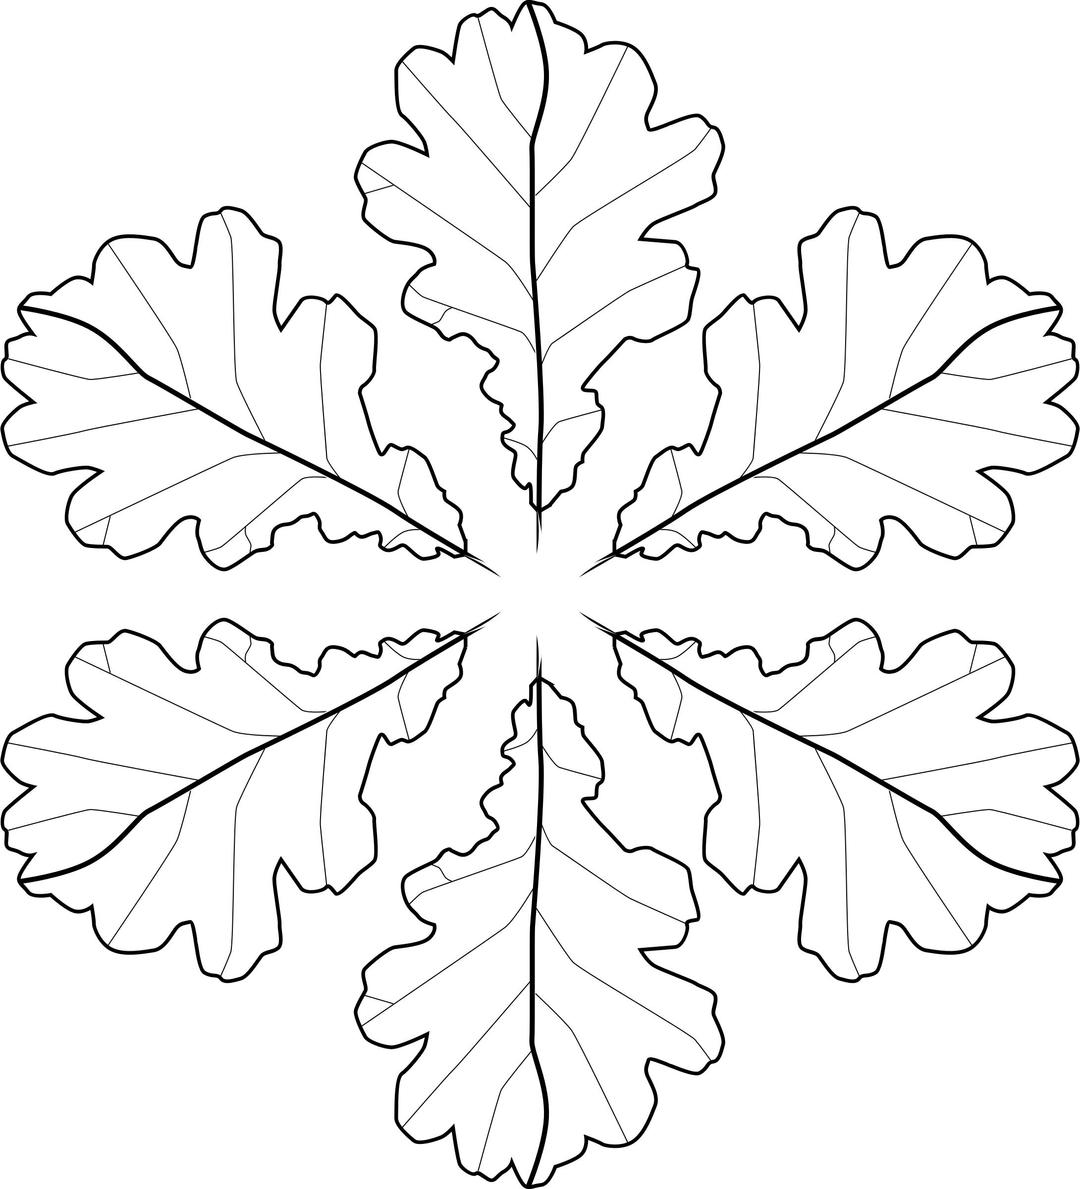 Fall Leaves Coloring Page png transparent